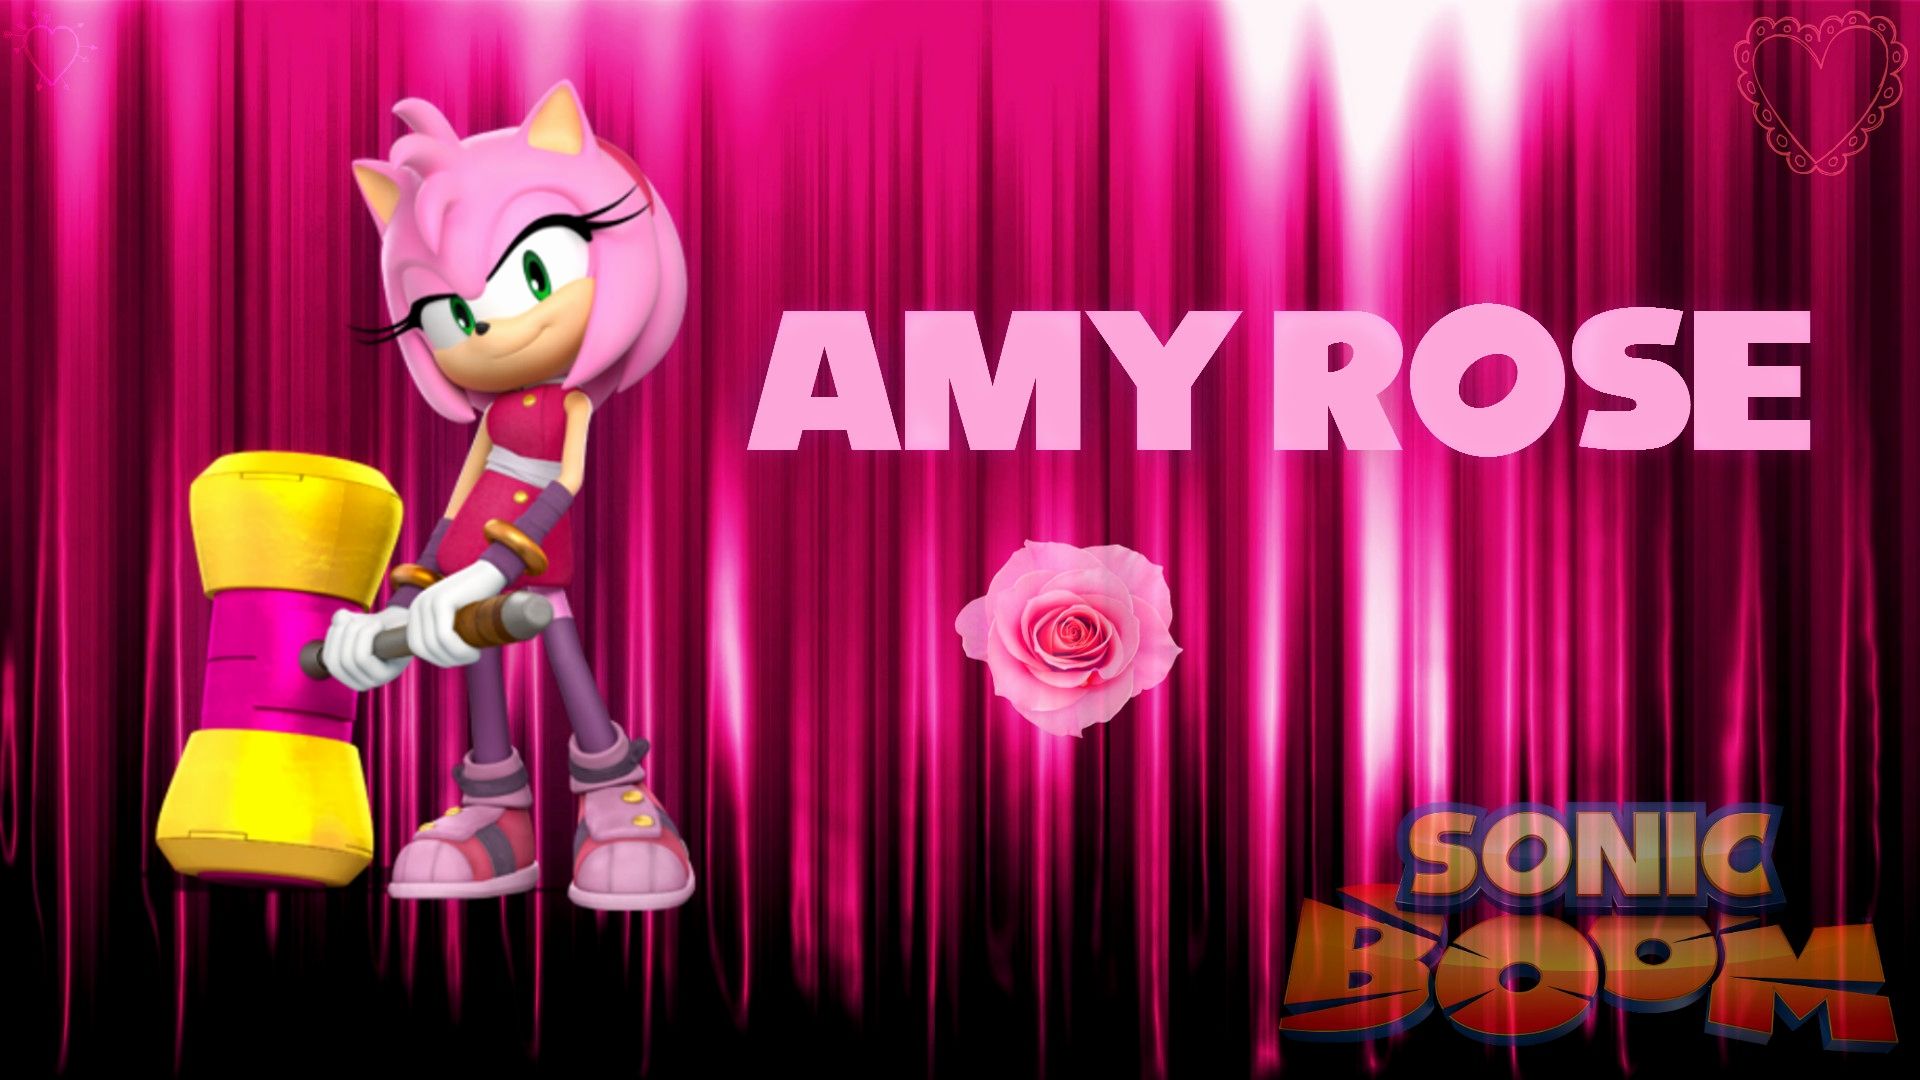 Amy Rose Wallpaper Lovely Amy Rose Wallpaper 73 Image Of the Day